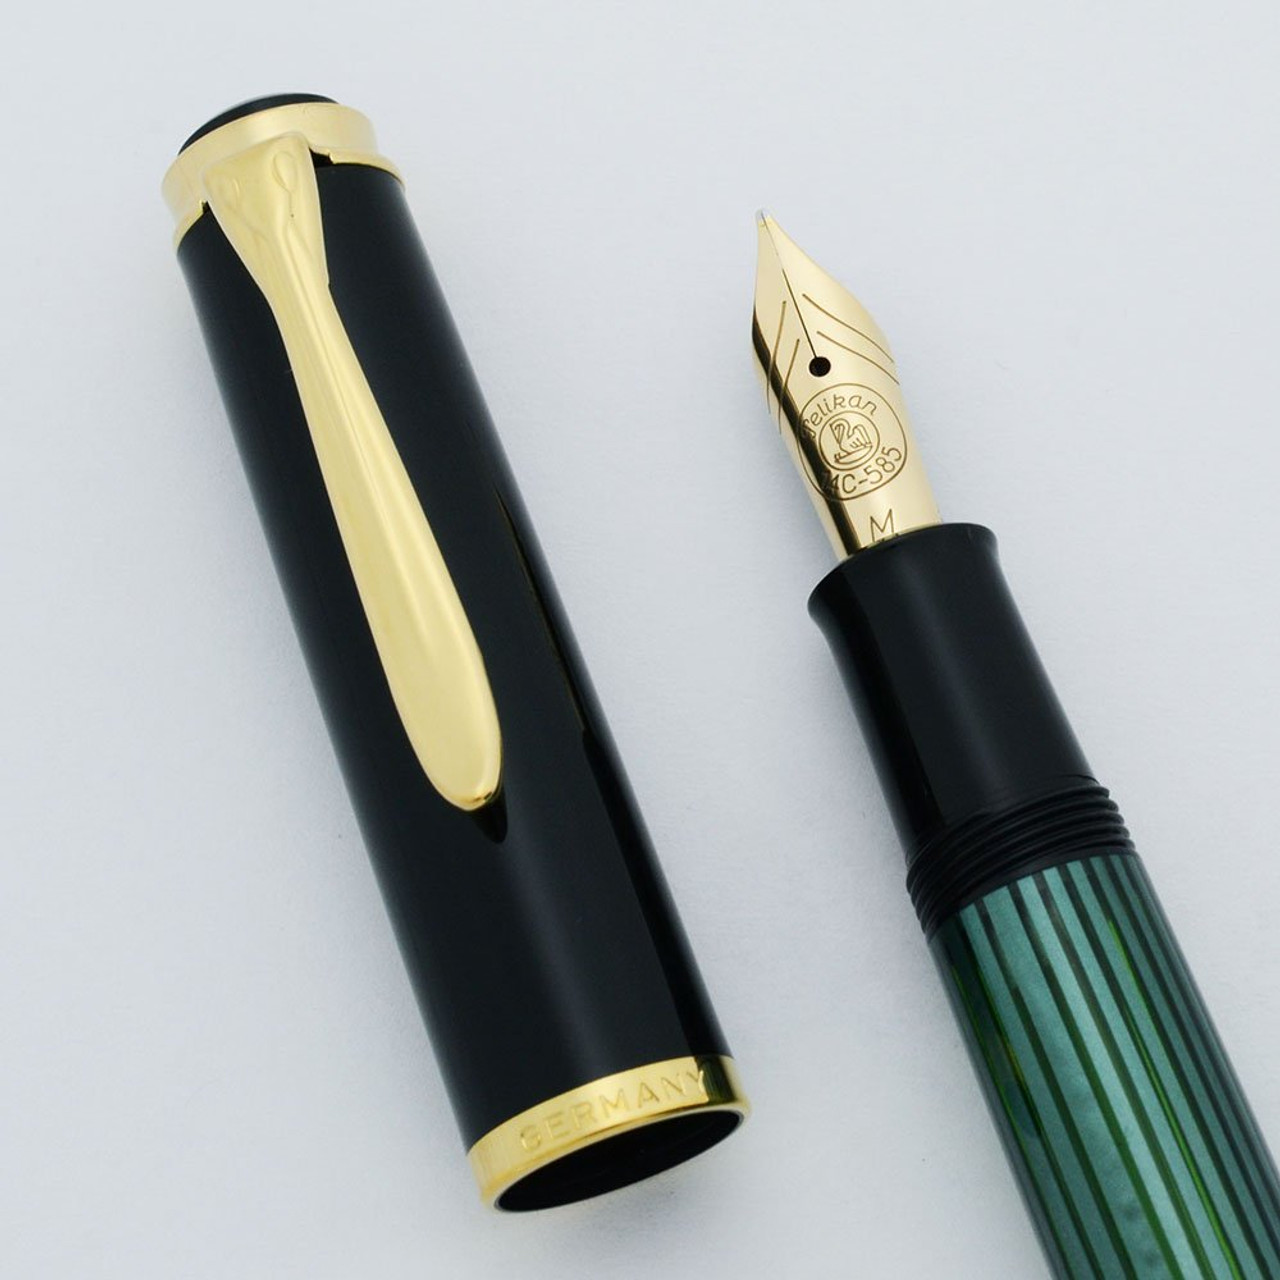 Pelikan M400 Fountain Pen - Old Style, Green Striped, Medium 14k Nib (Excellent + in Box, Works Well)